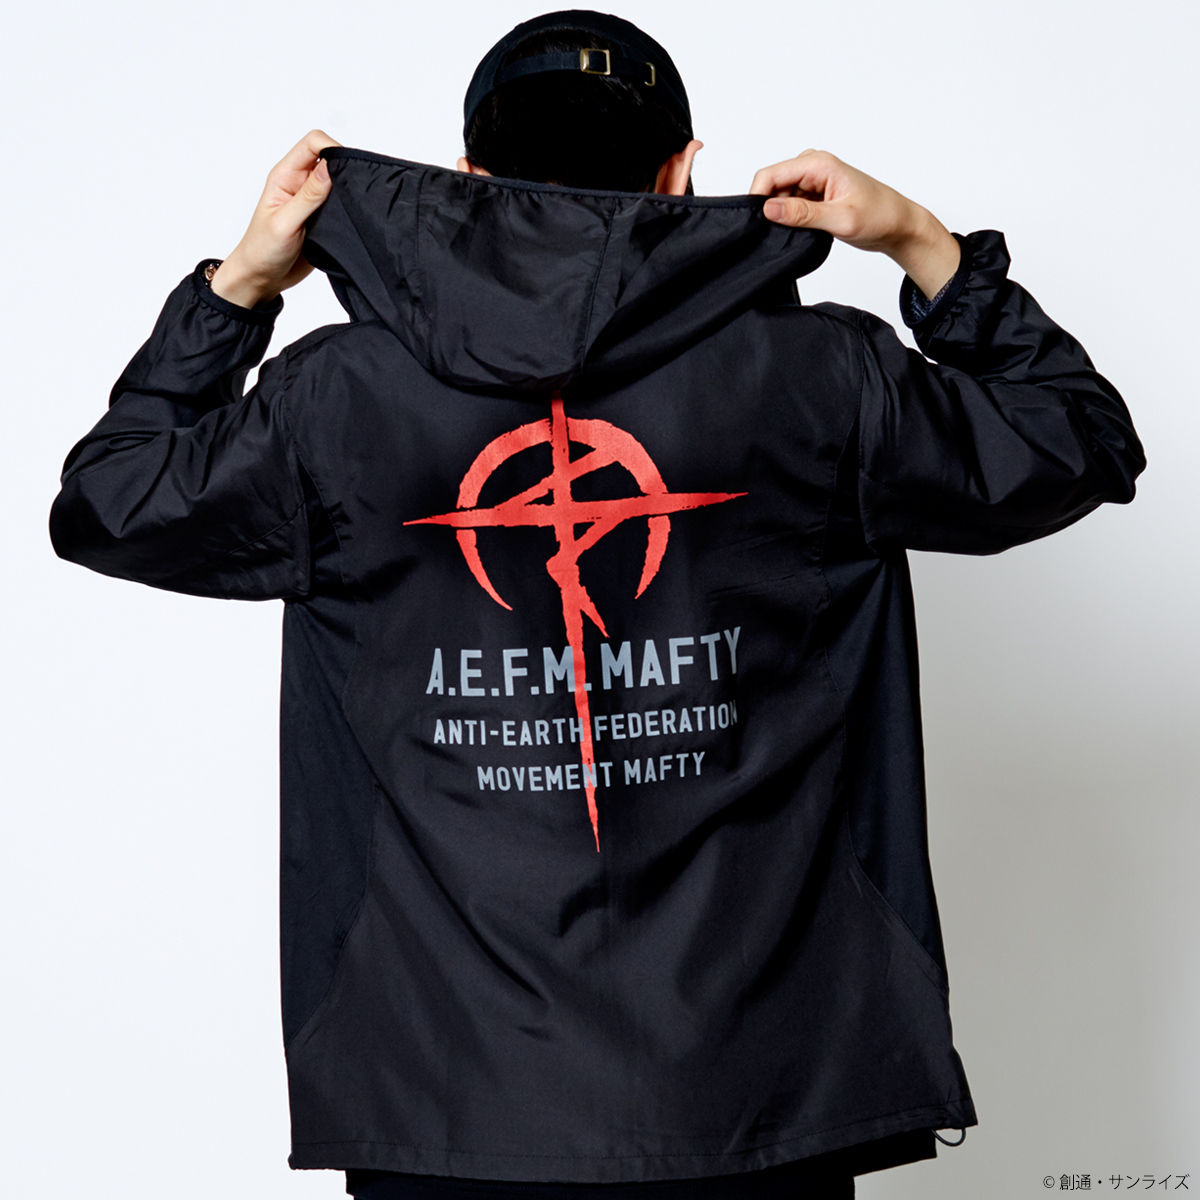 Mafty Windbreaker—Mobile Suit Gundam Hathaway/STRICT-G Collaboration  [Feb 2022 Delivery]